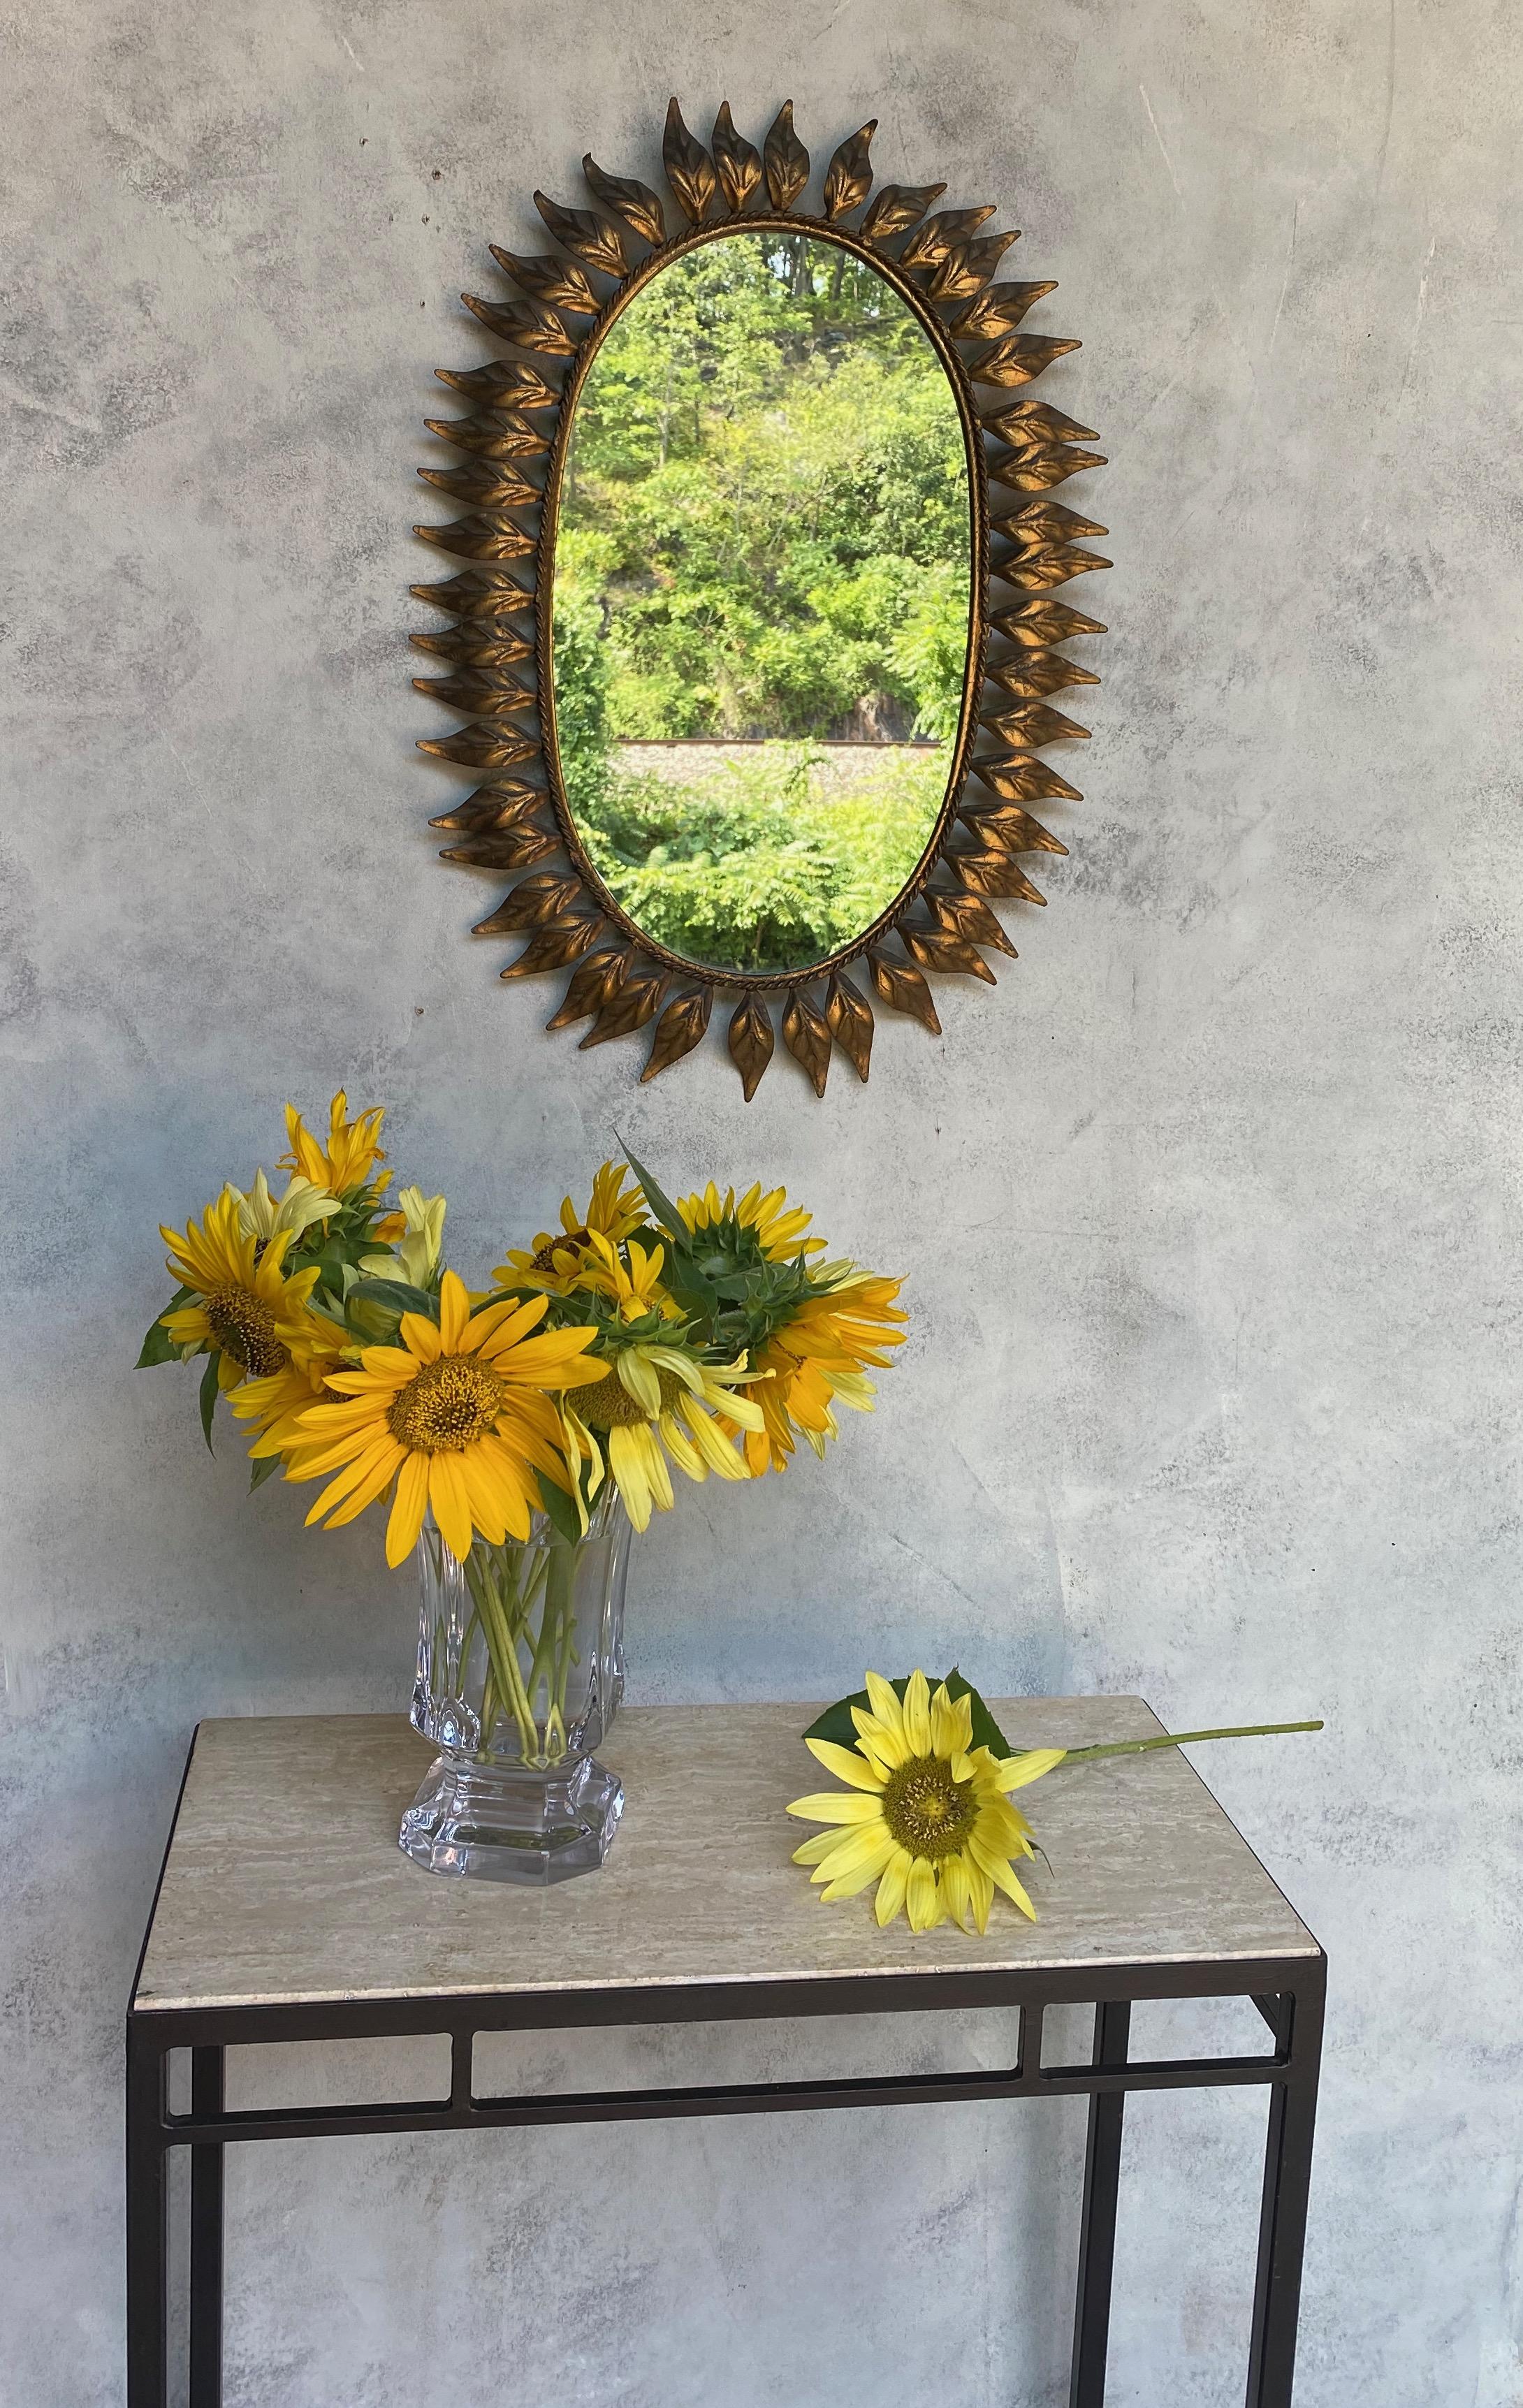 This lovely oval sunburst mirror features curved radiating leaves surrounding a frame with a delicate braided detail. It is finished in a rich gilt patina. We recently added a felt backing to the mirror to give it more protection and a finished